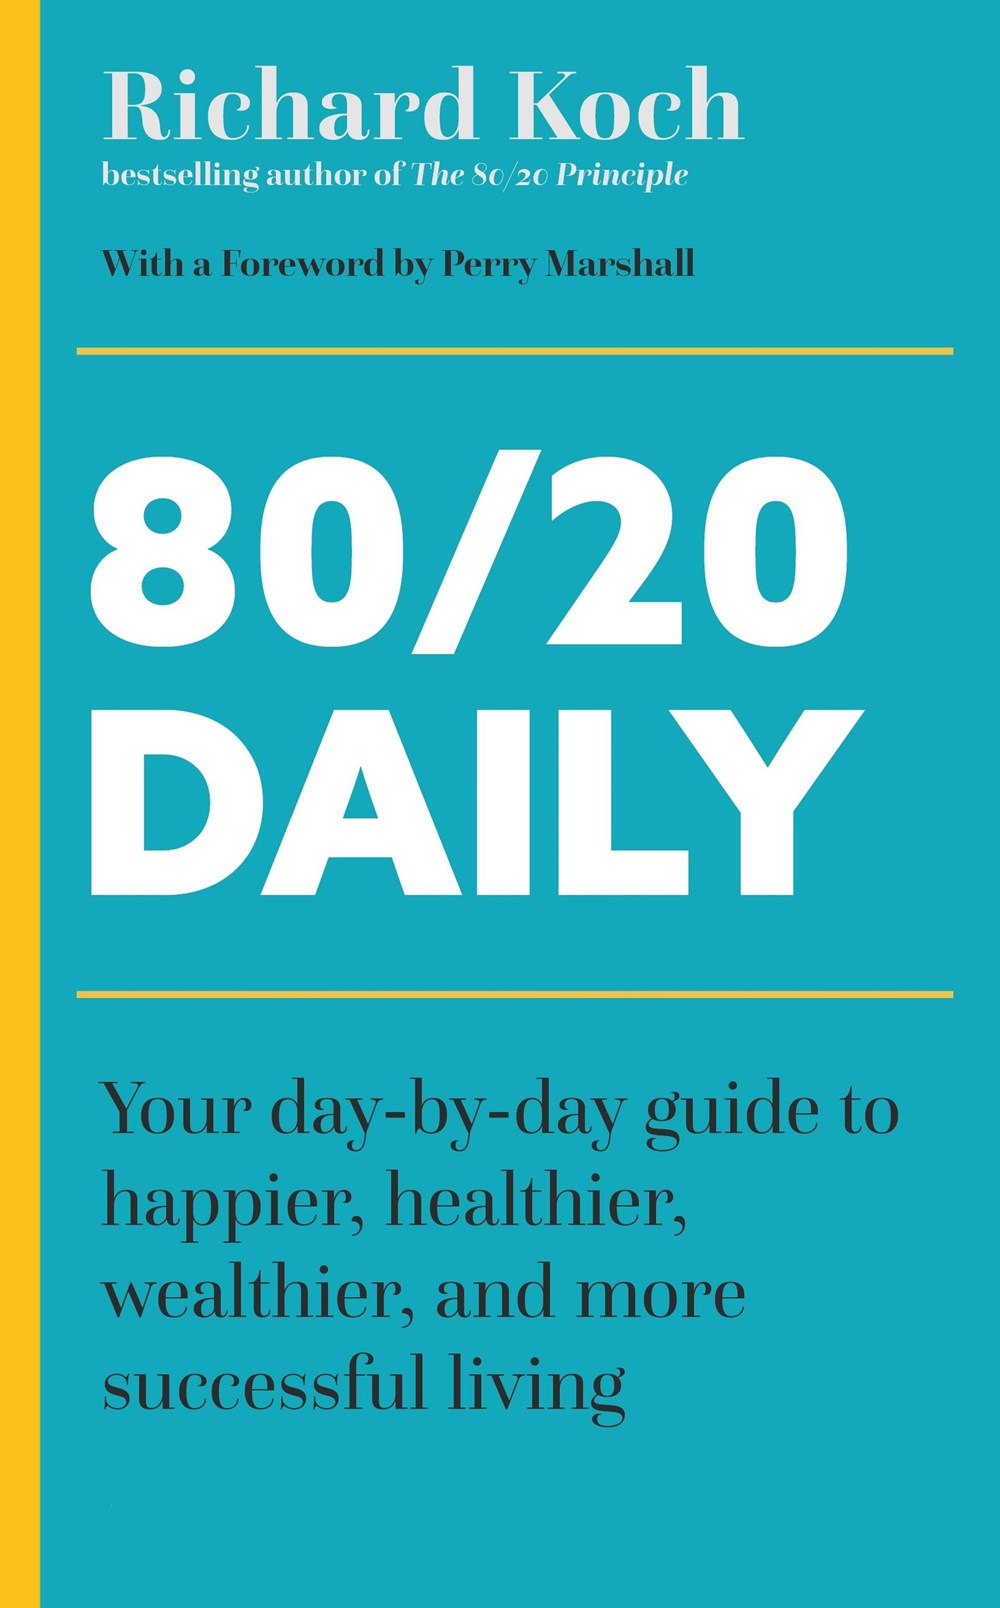 80/20 Daily: Your Day-by-Day Guide to Happier, Healthier, Wealthier, and More Successful Living Using the 80/20 Principle